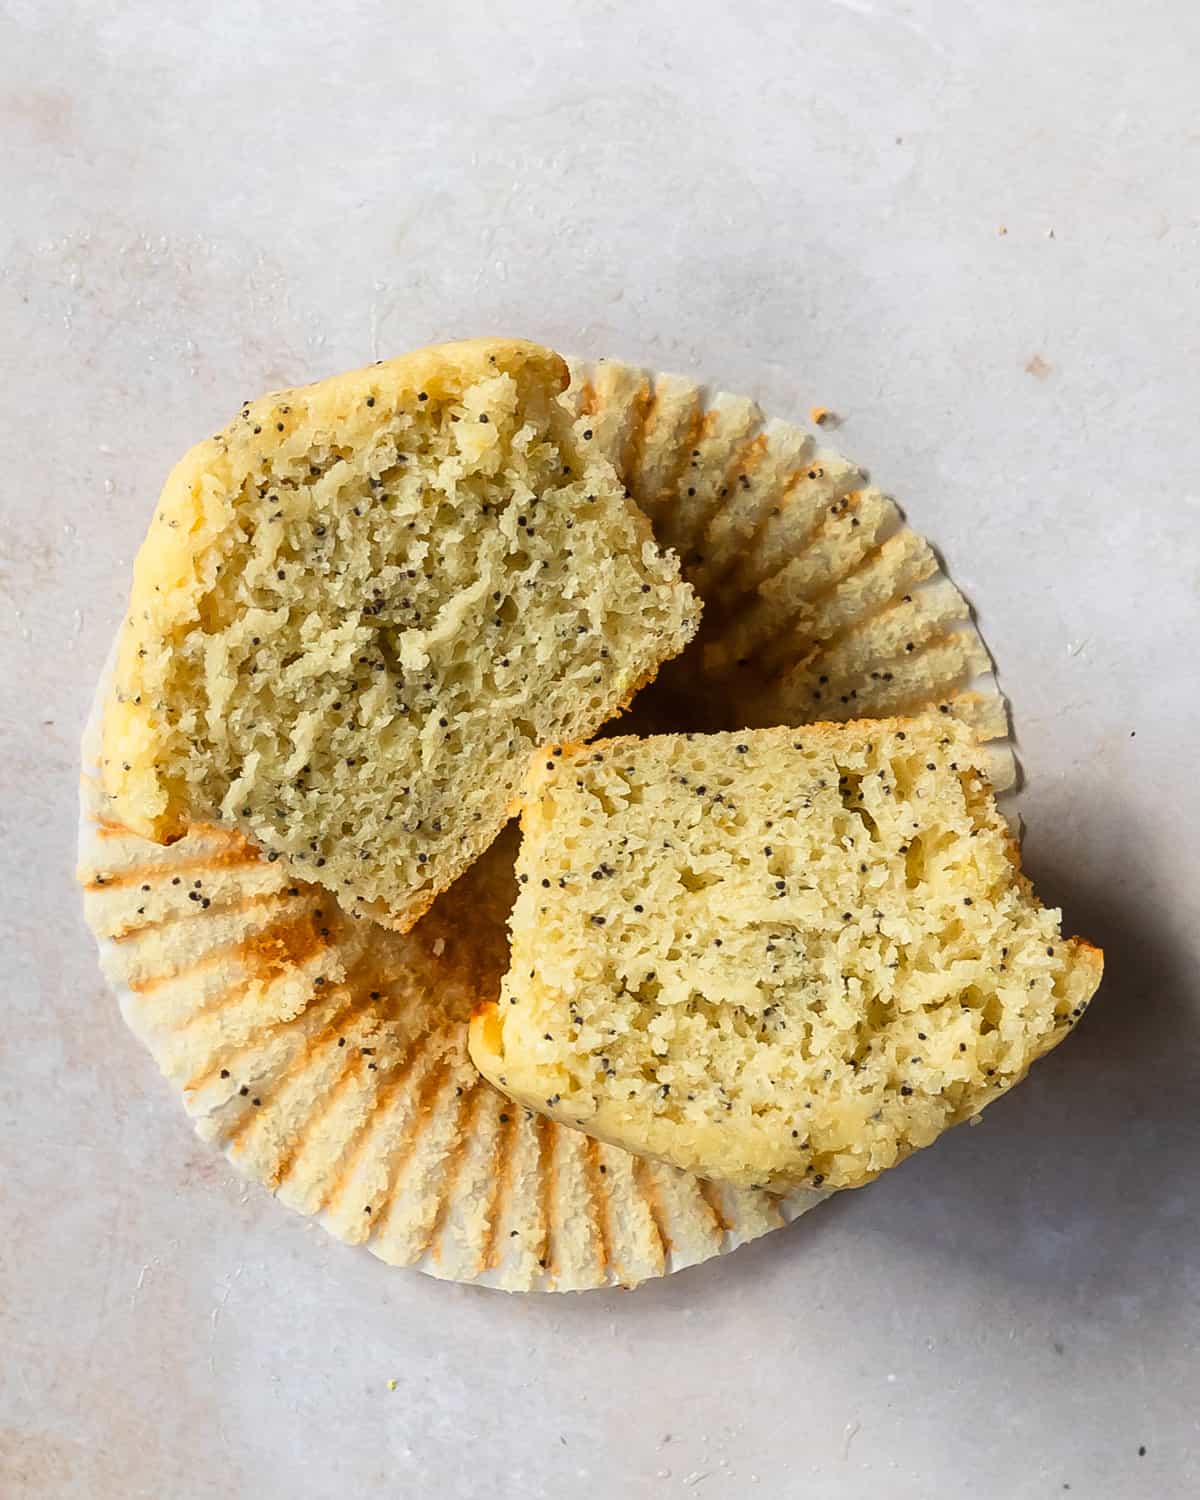 Lemon poppy seed muffins are fluffy, moist and tangy bakery style muffins studded with crunchy poppy seeds and bursting with fresh citrus flavor. After baking, the poppy seed muffin tops are brushed with a bright, sweet and tart lemon simple syrup glaze. 